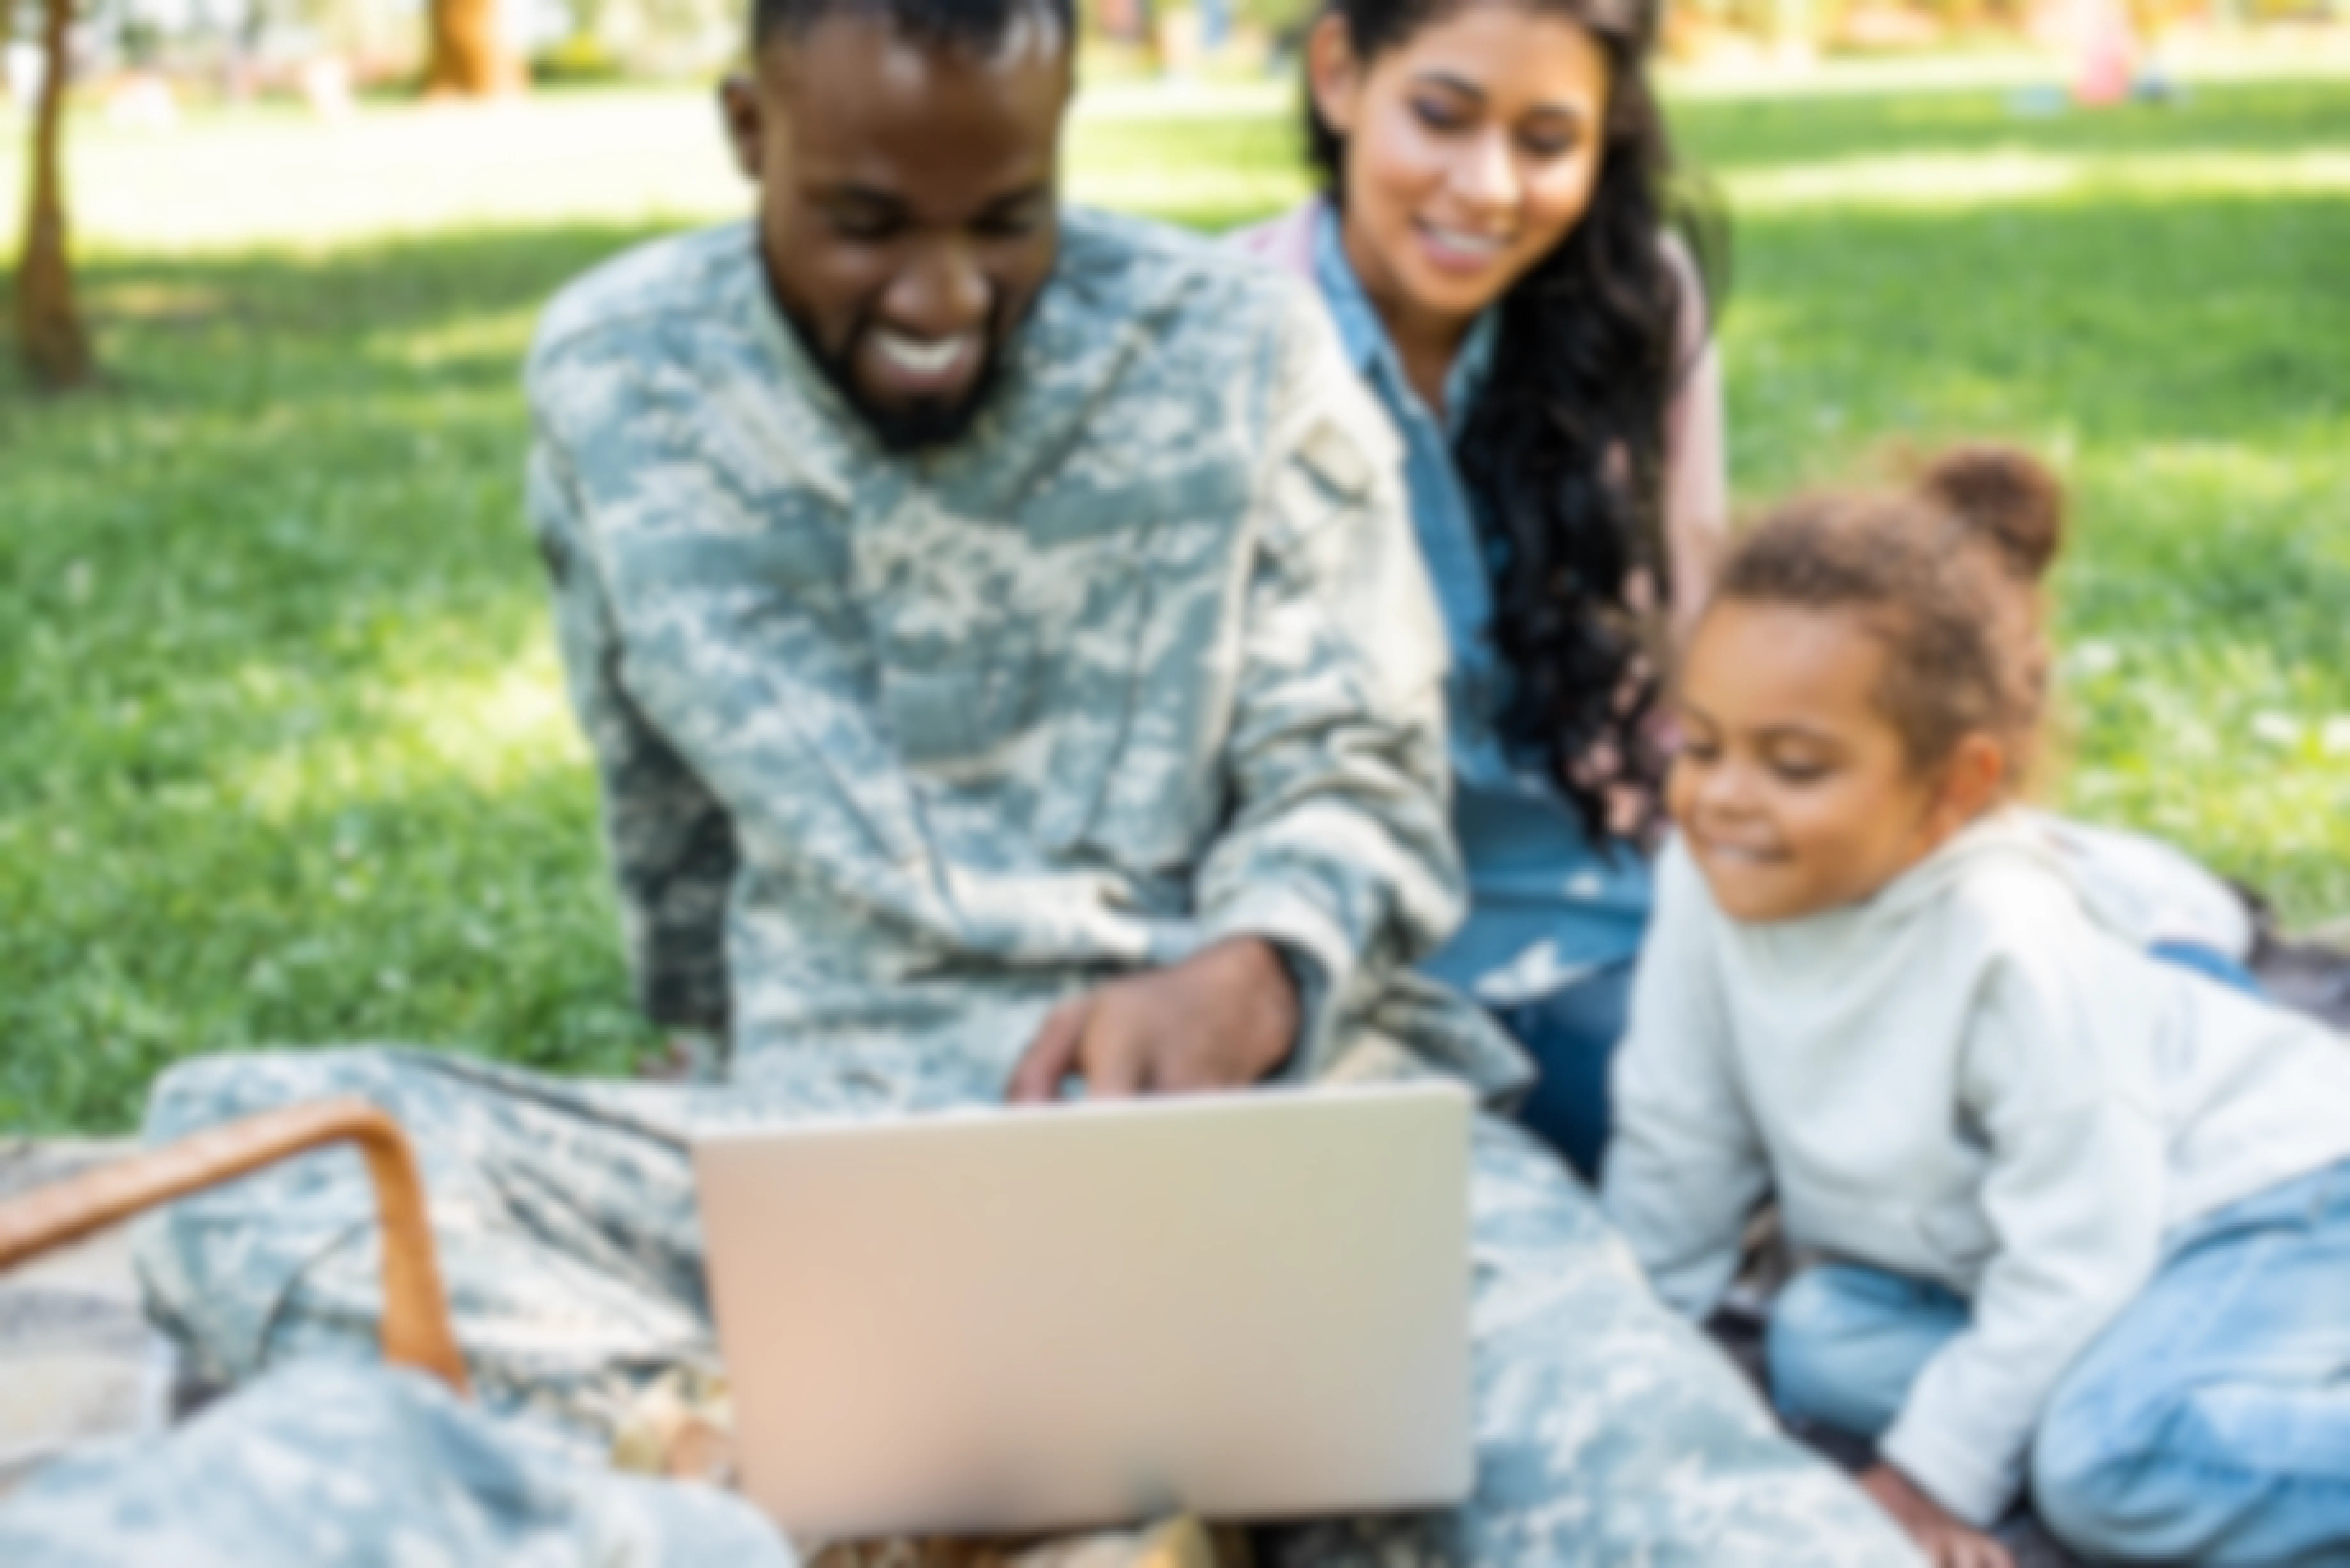 A family sitting on a lawn looking at a laptop computer